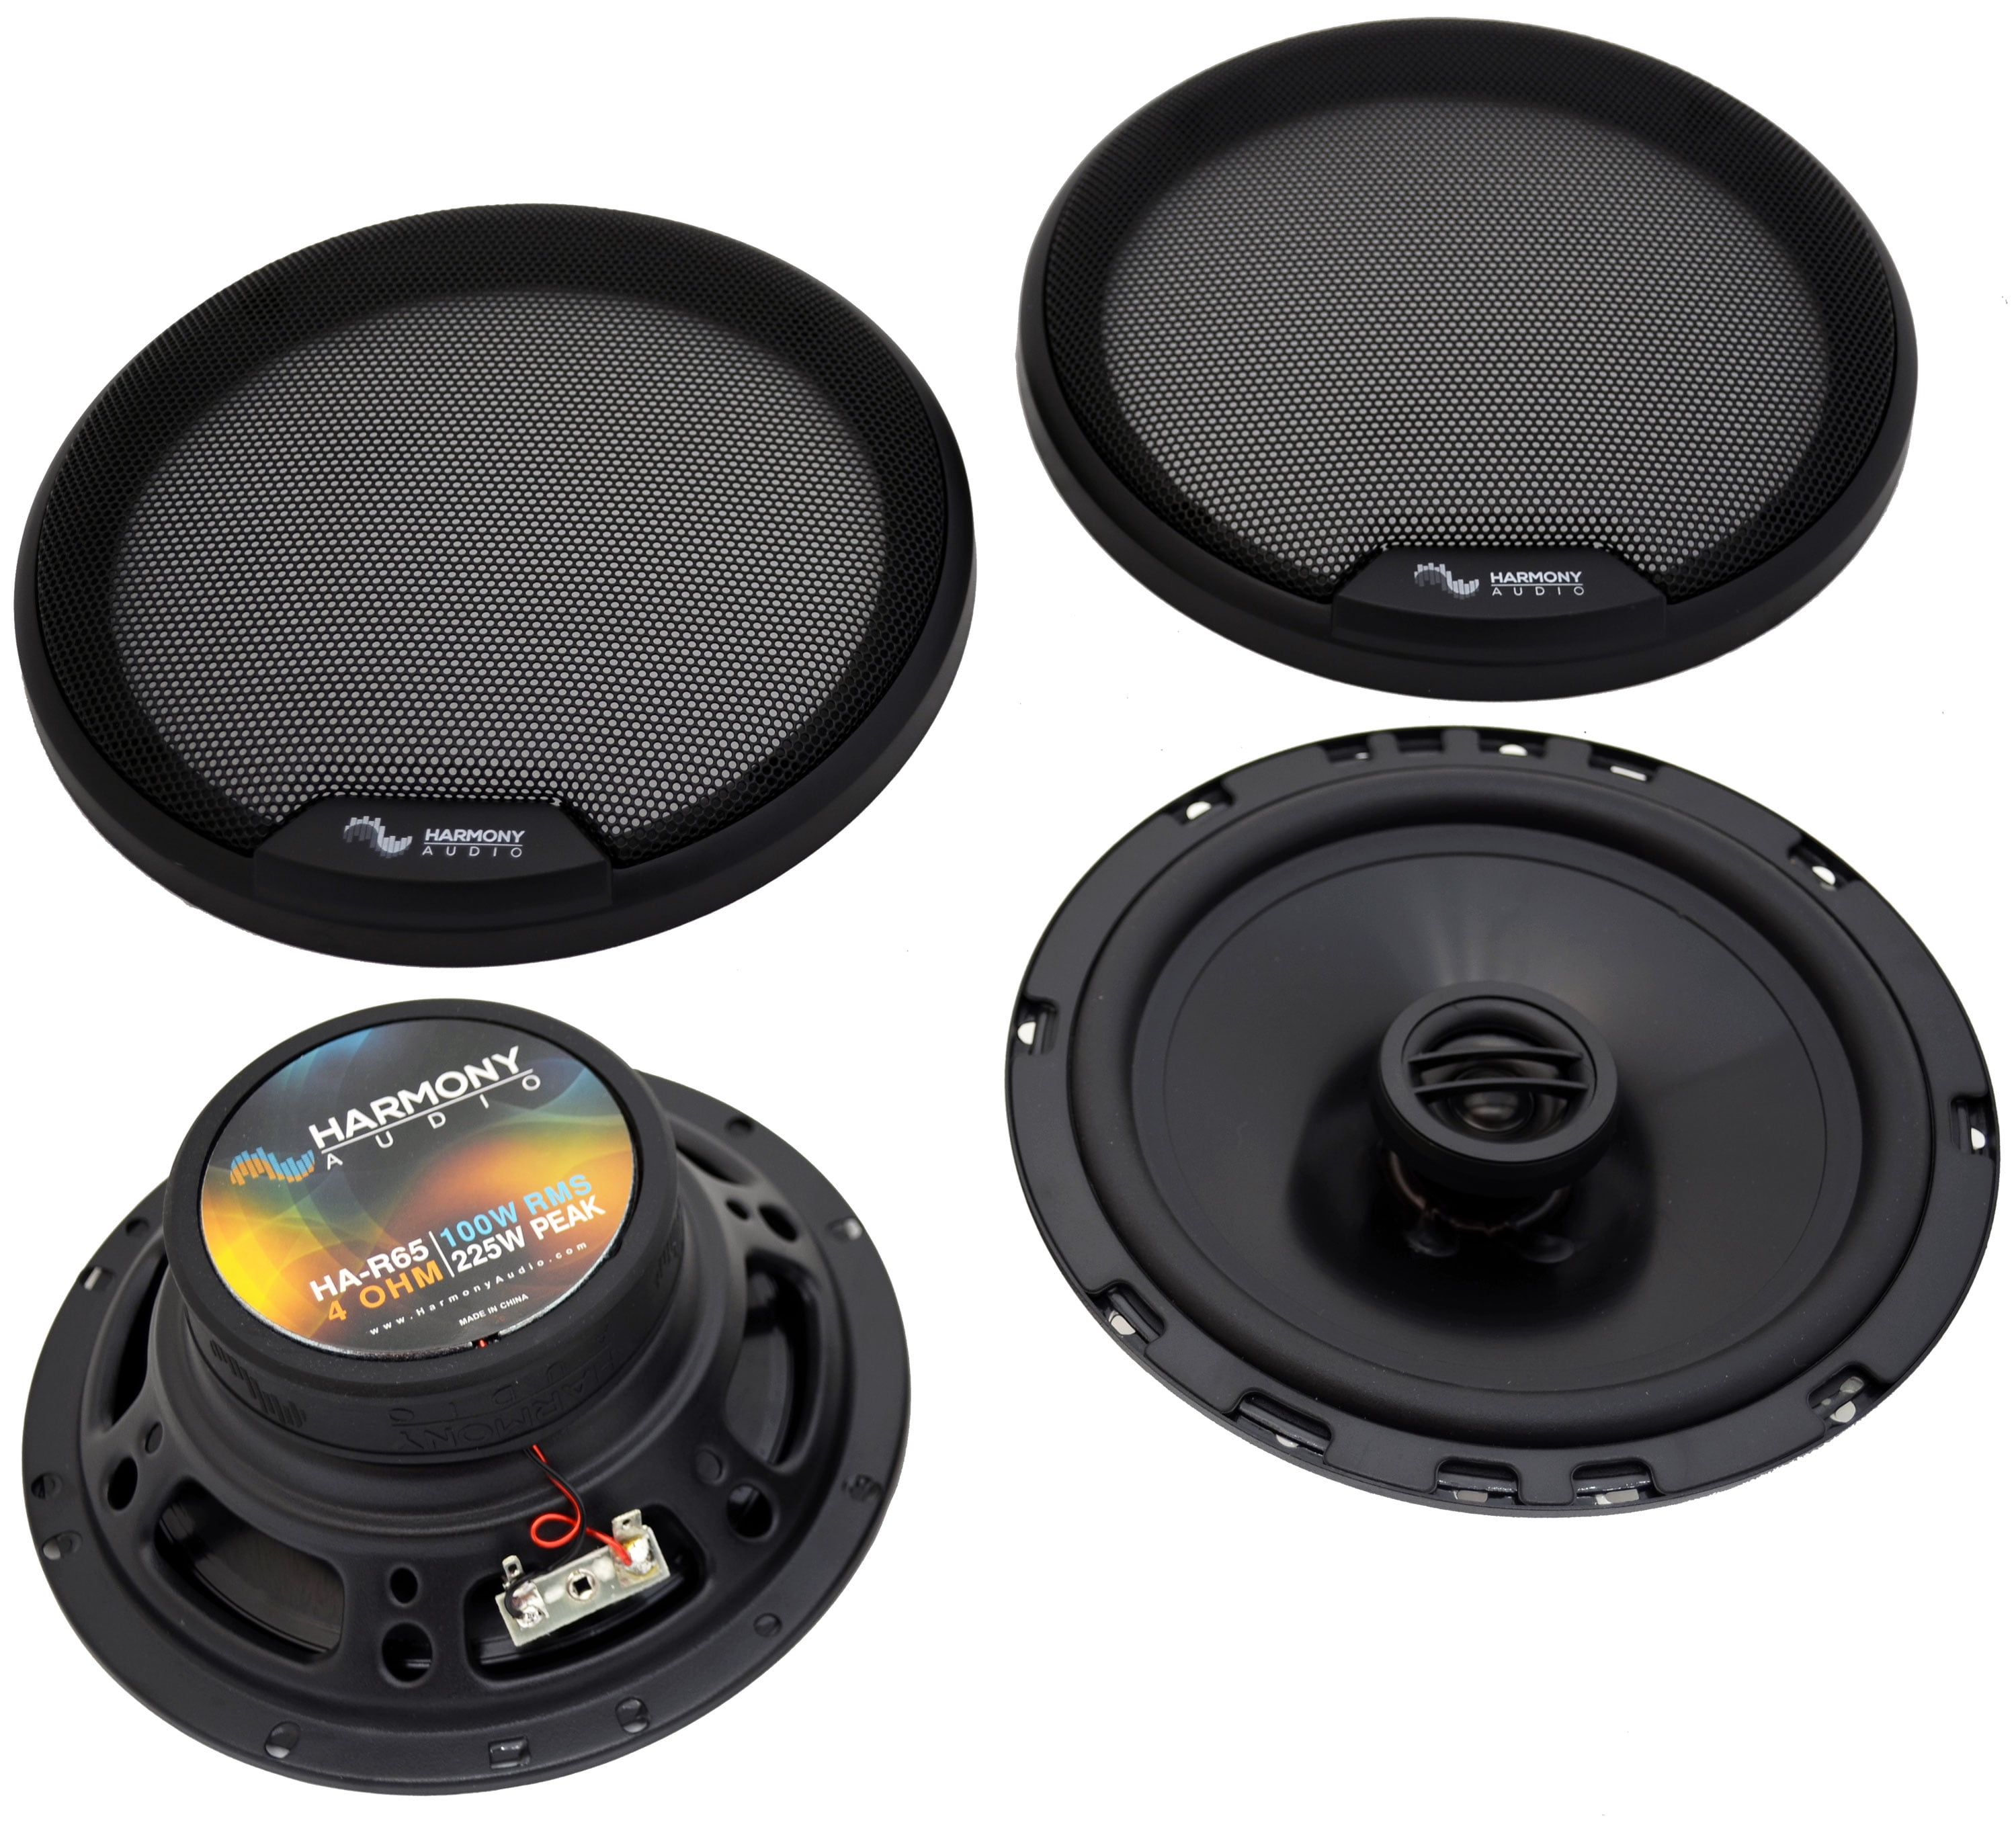 Compatible with Ford Edge 2015-2018 Factory Speaker Replacement Package  Harmony Bundle R65 Speakers CXA360.4